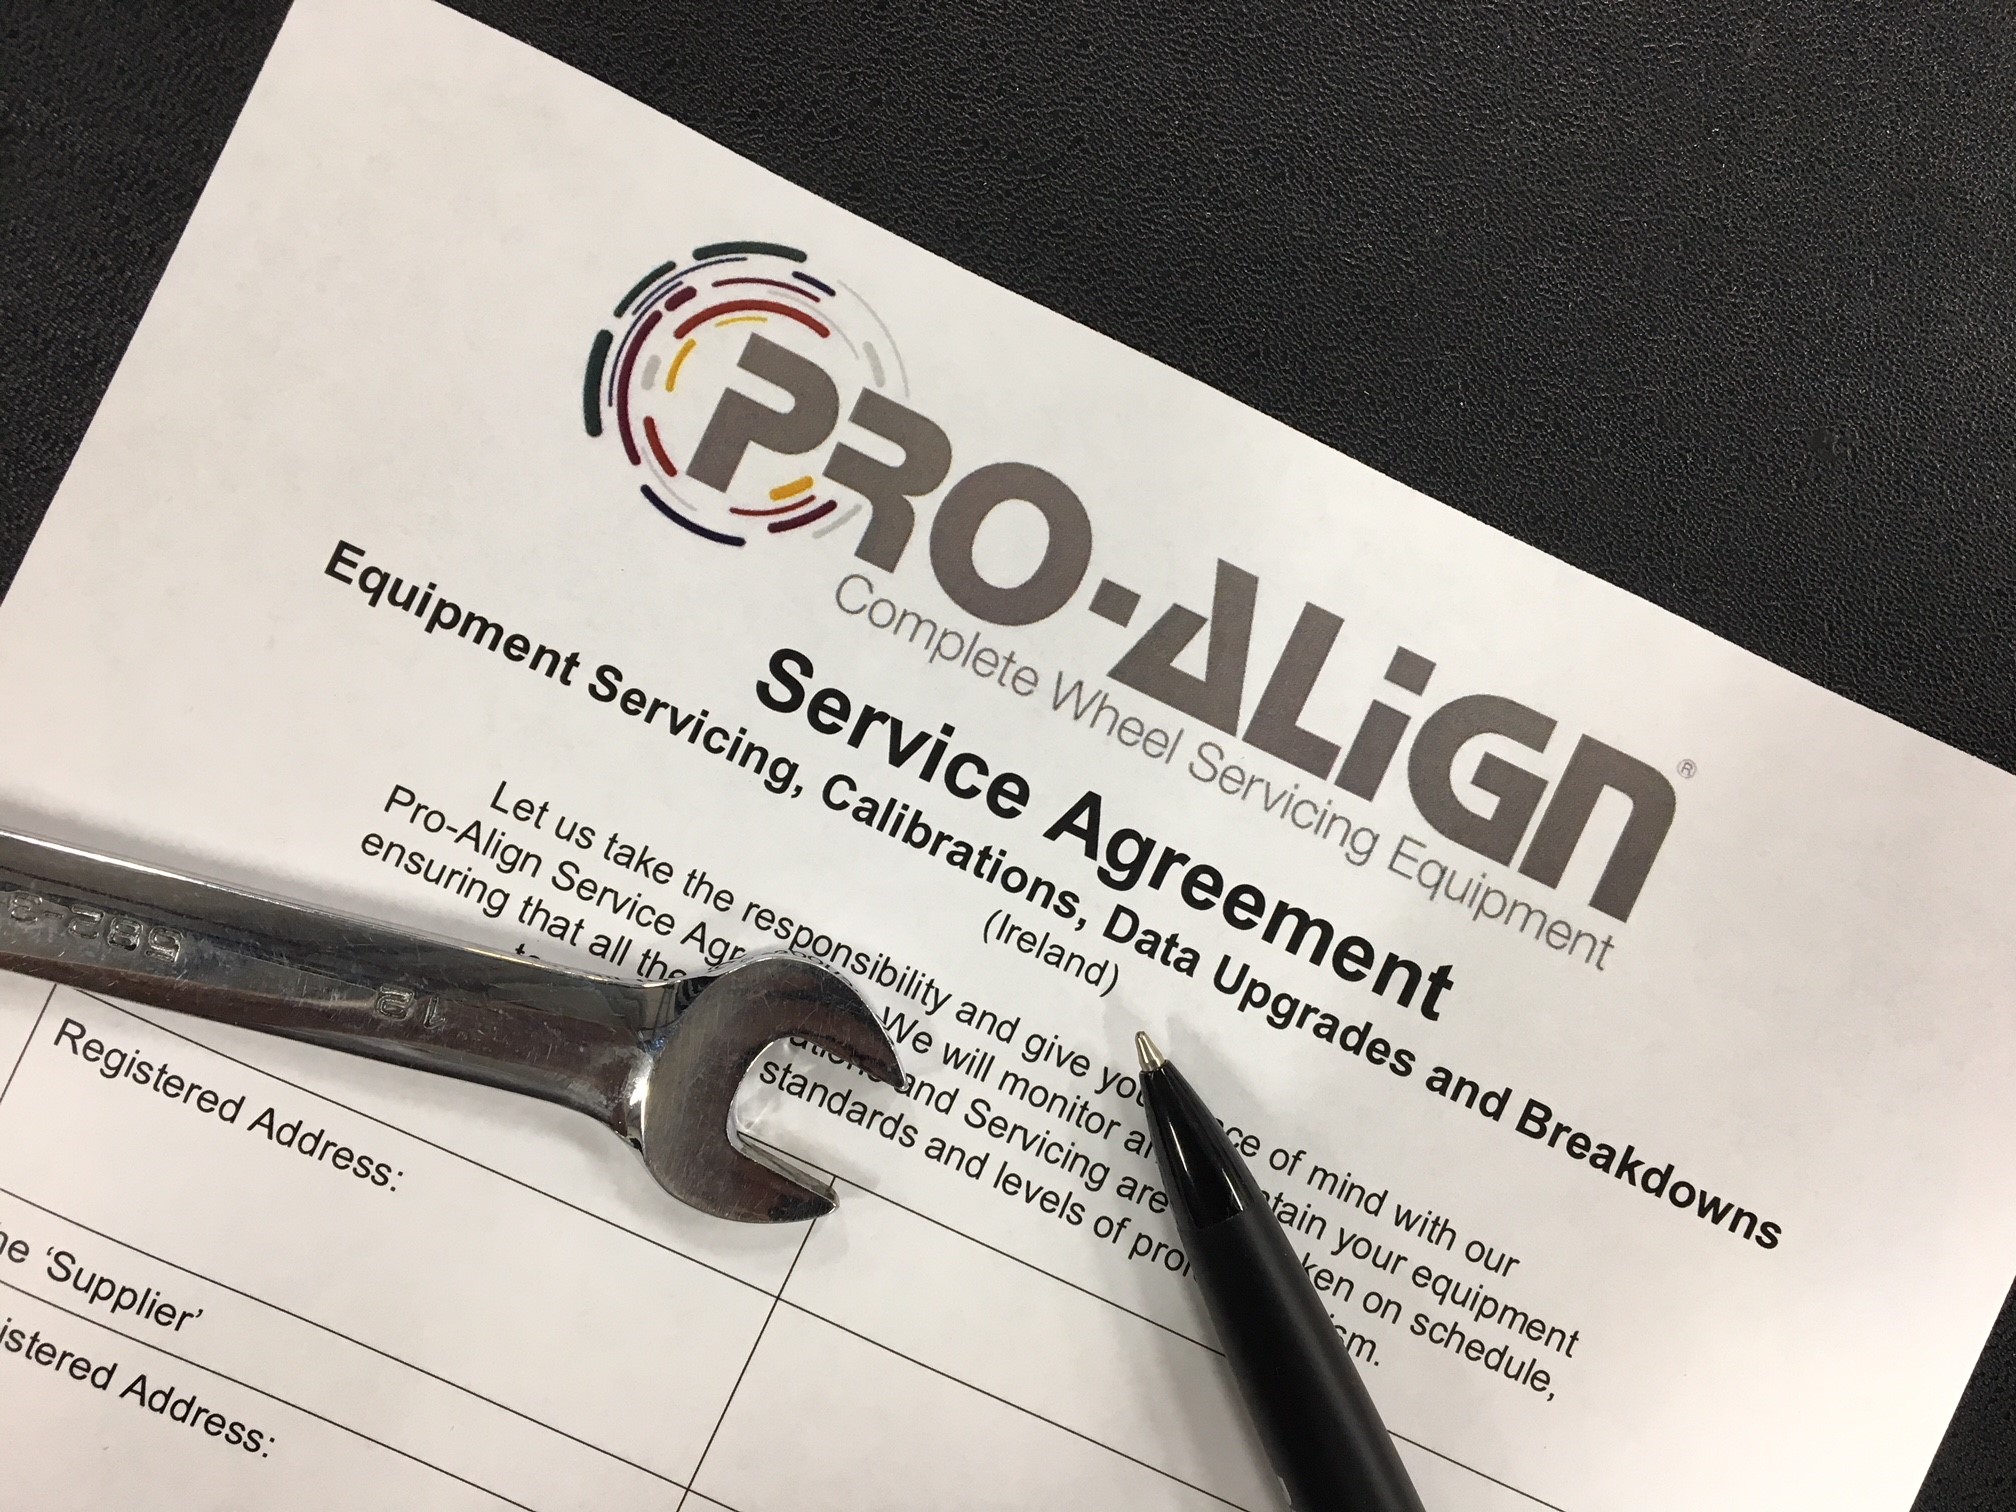 , Services Agreement